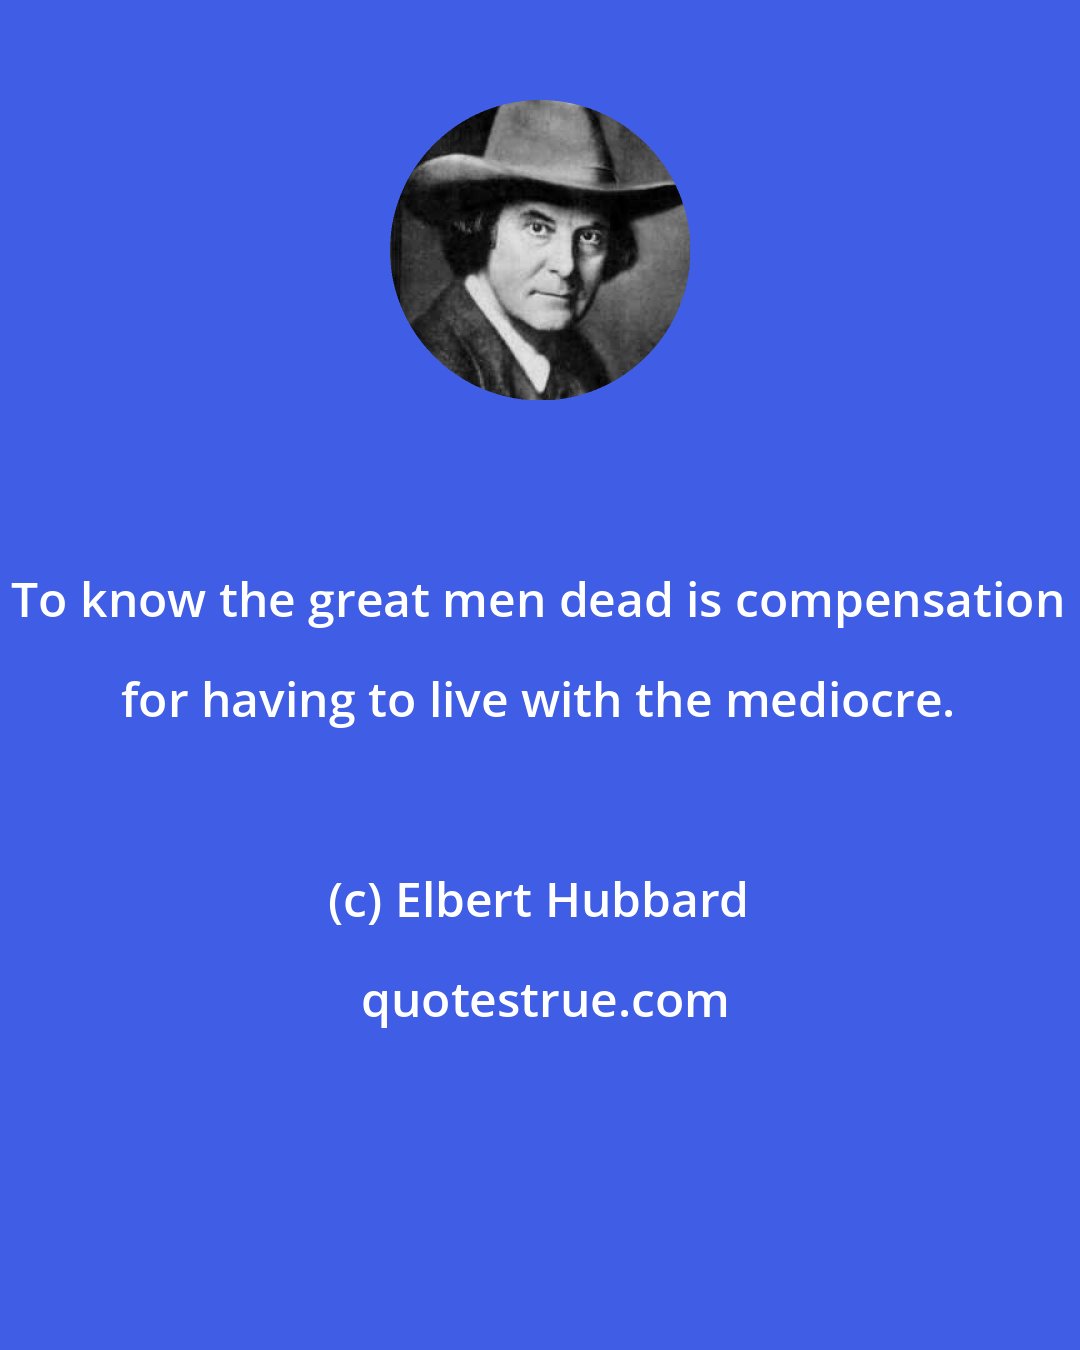 Elbert Hubbard: To know the great men dead is compensation for having to live with the mediocre.